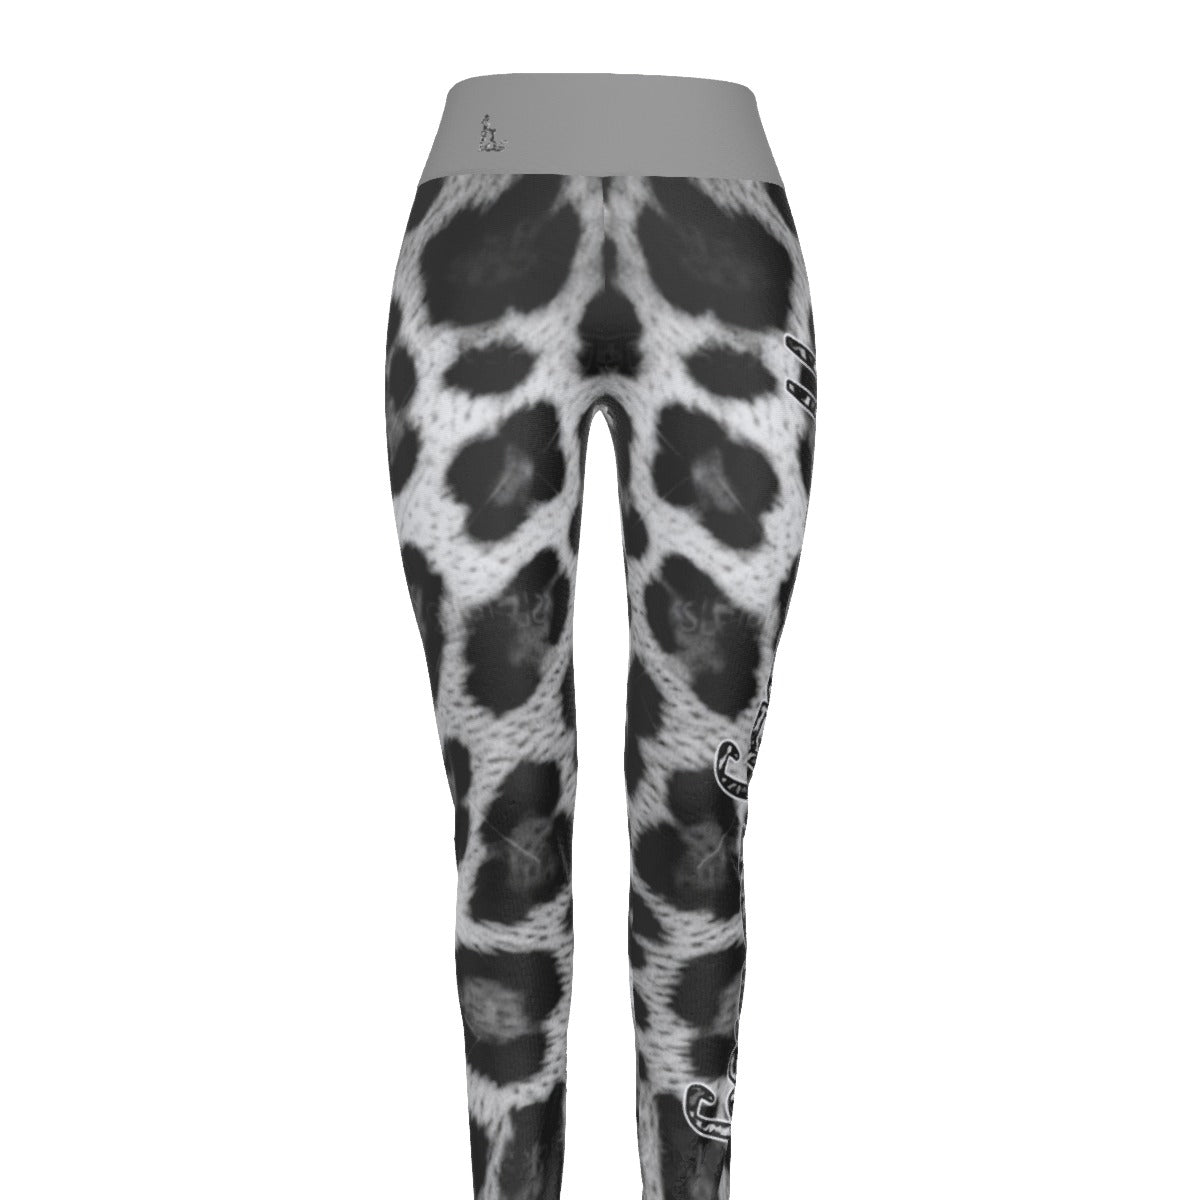 Officially Sexy Snow Leopard Print Collection Women's Grey High Waist Leggings #2 (English) 1